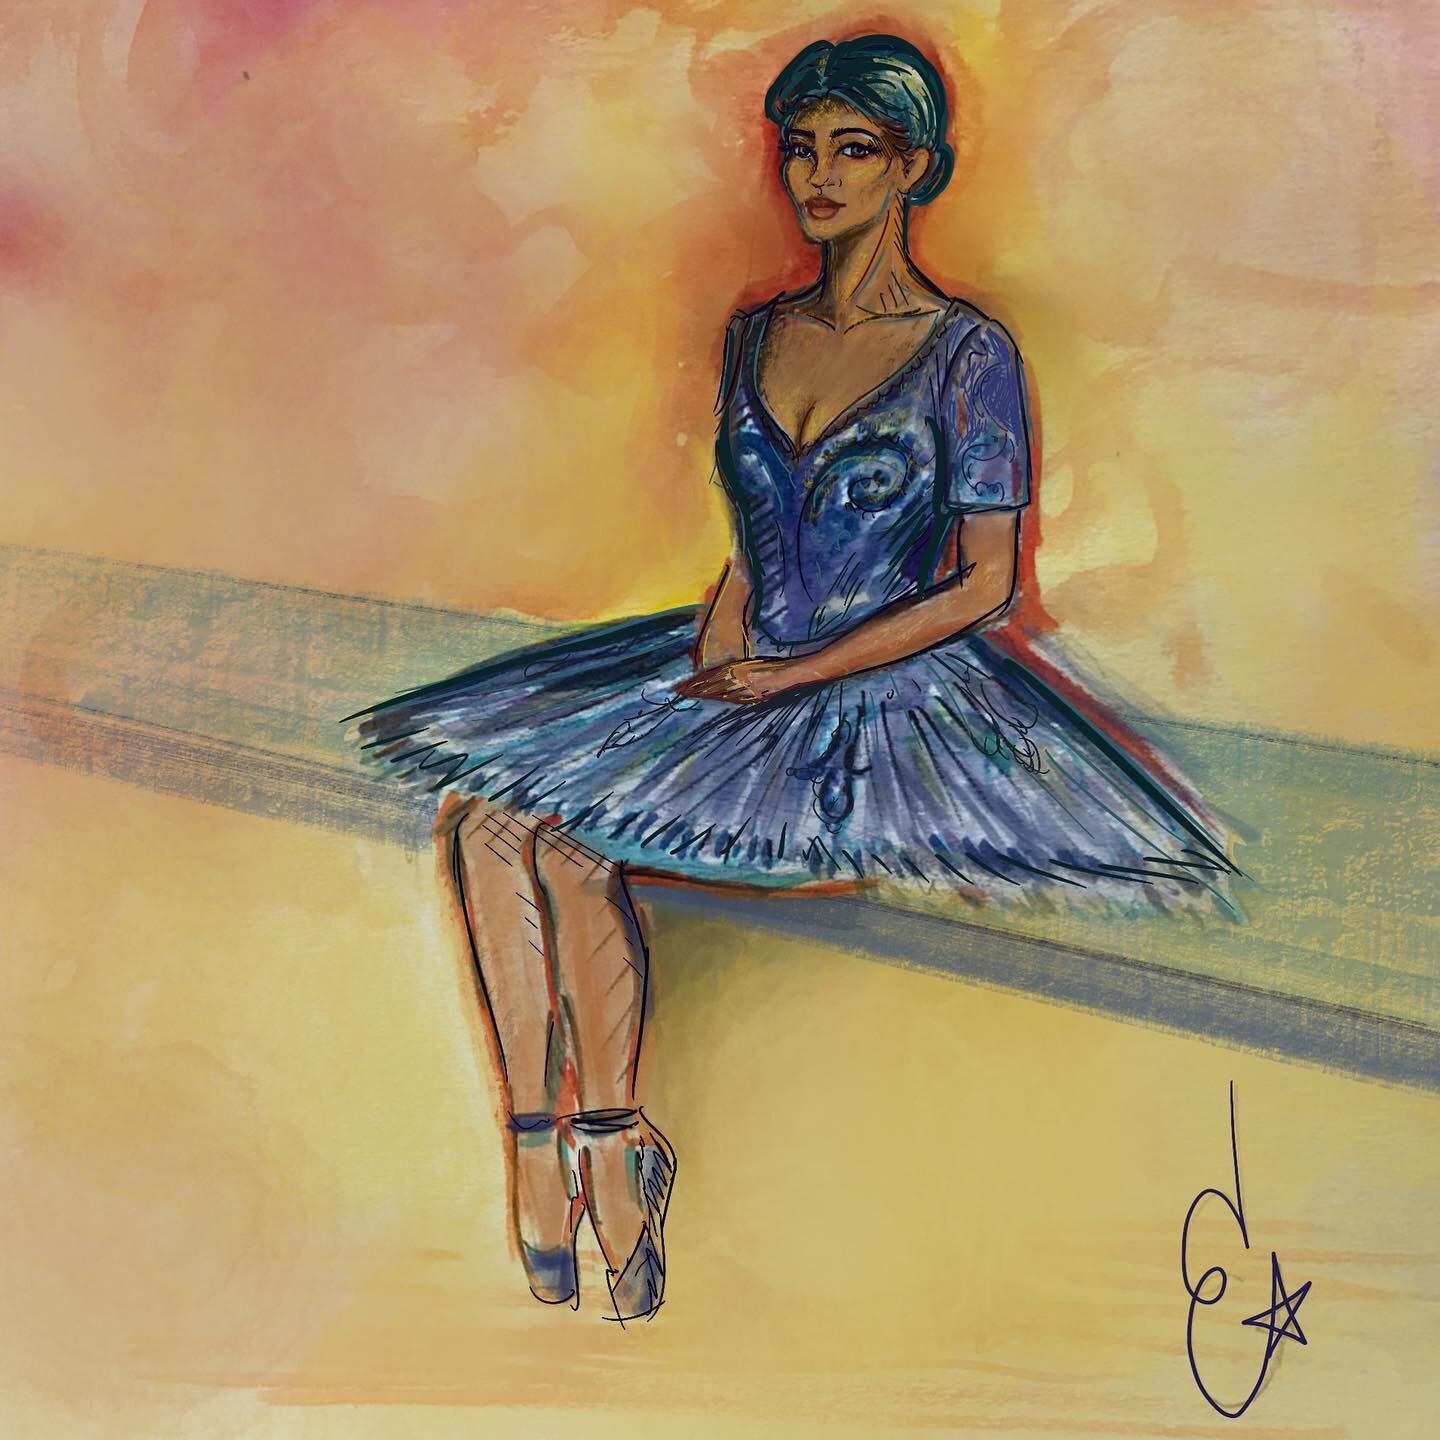 Watercolor + Procreate app, time lapse video of initial watercolor sketch and work in #procreate

#illustration #ballet #ballerina #costumedesign #vibrant #watercolor #digitalart #proceateart